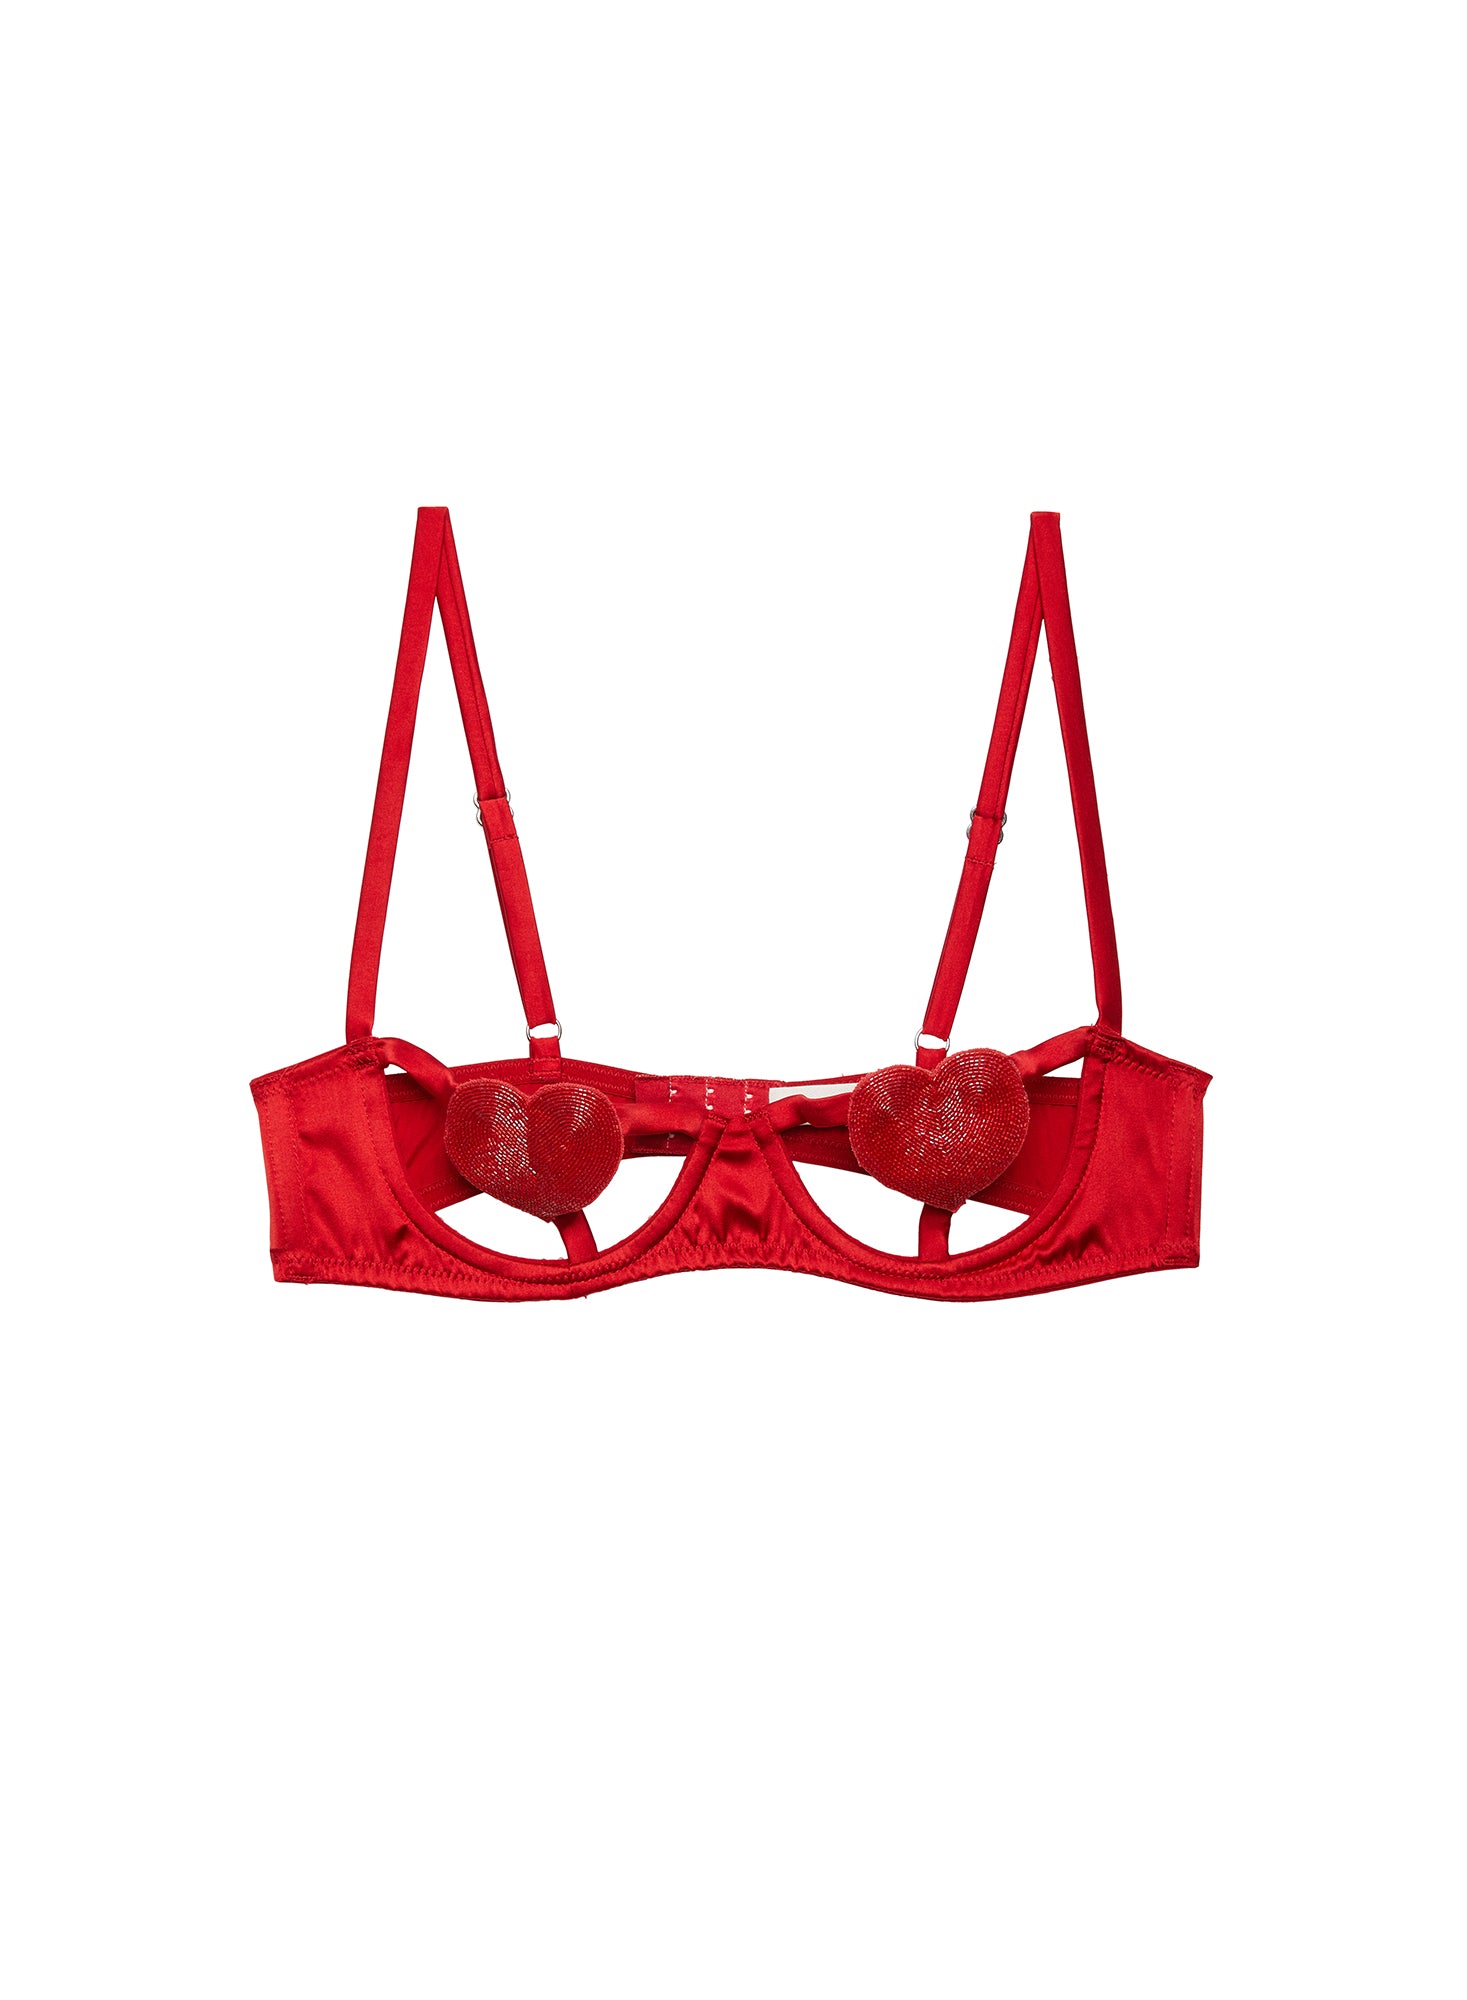 All About Eve Balconette Bra by Fleur du Mal at ORCHARD MILE